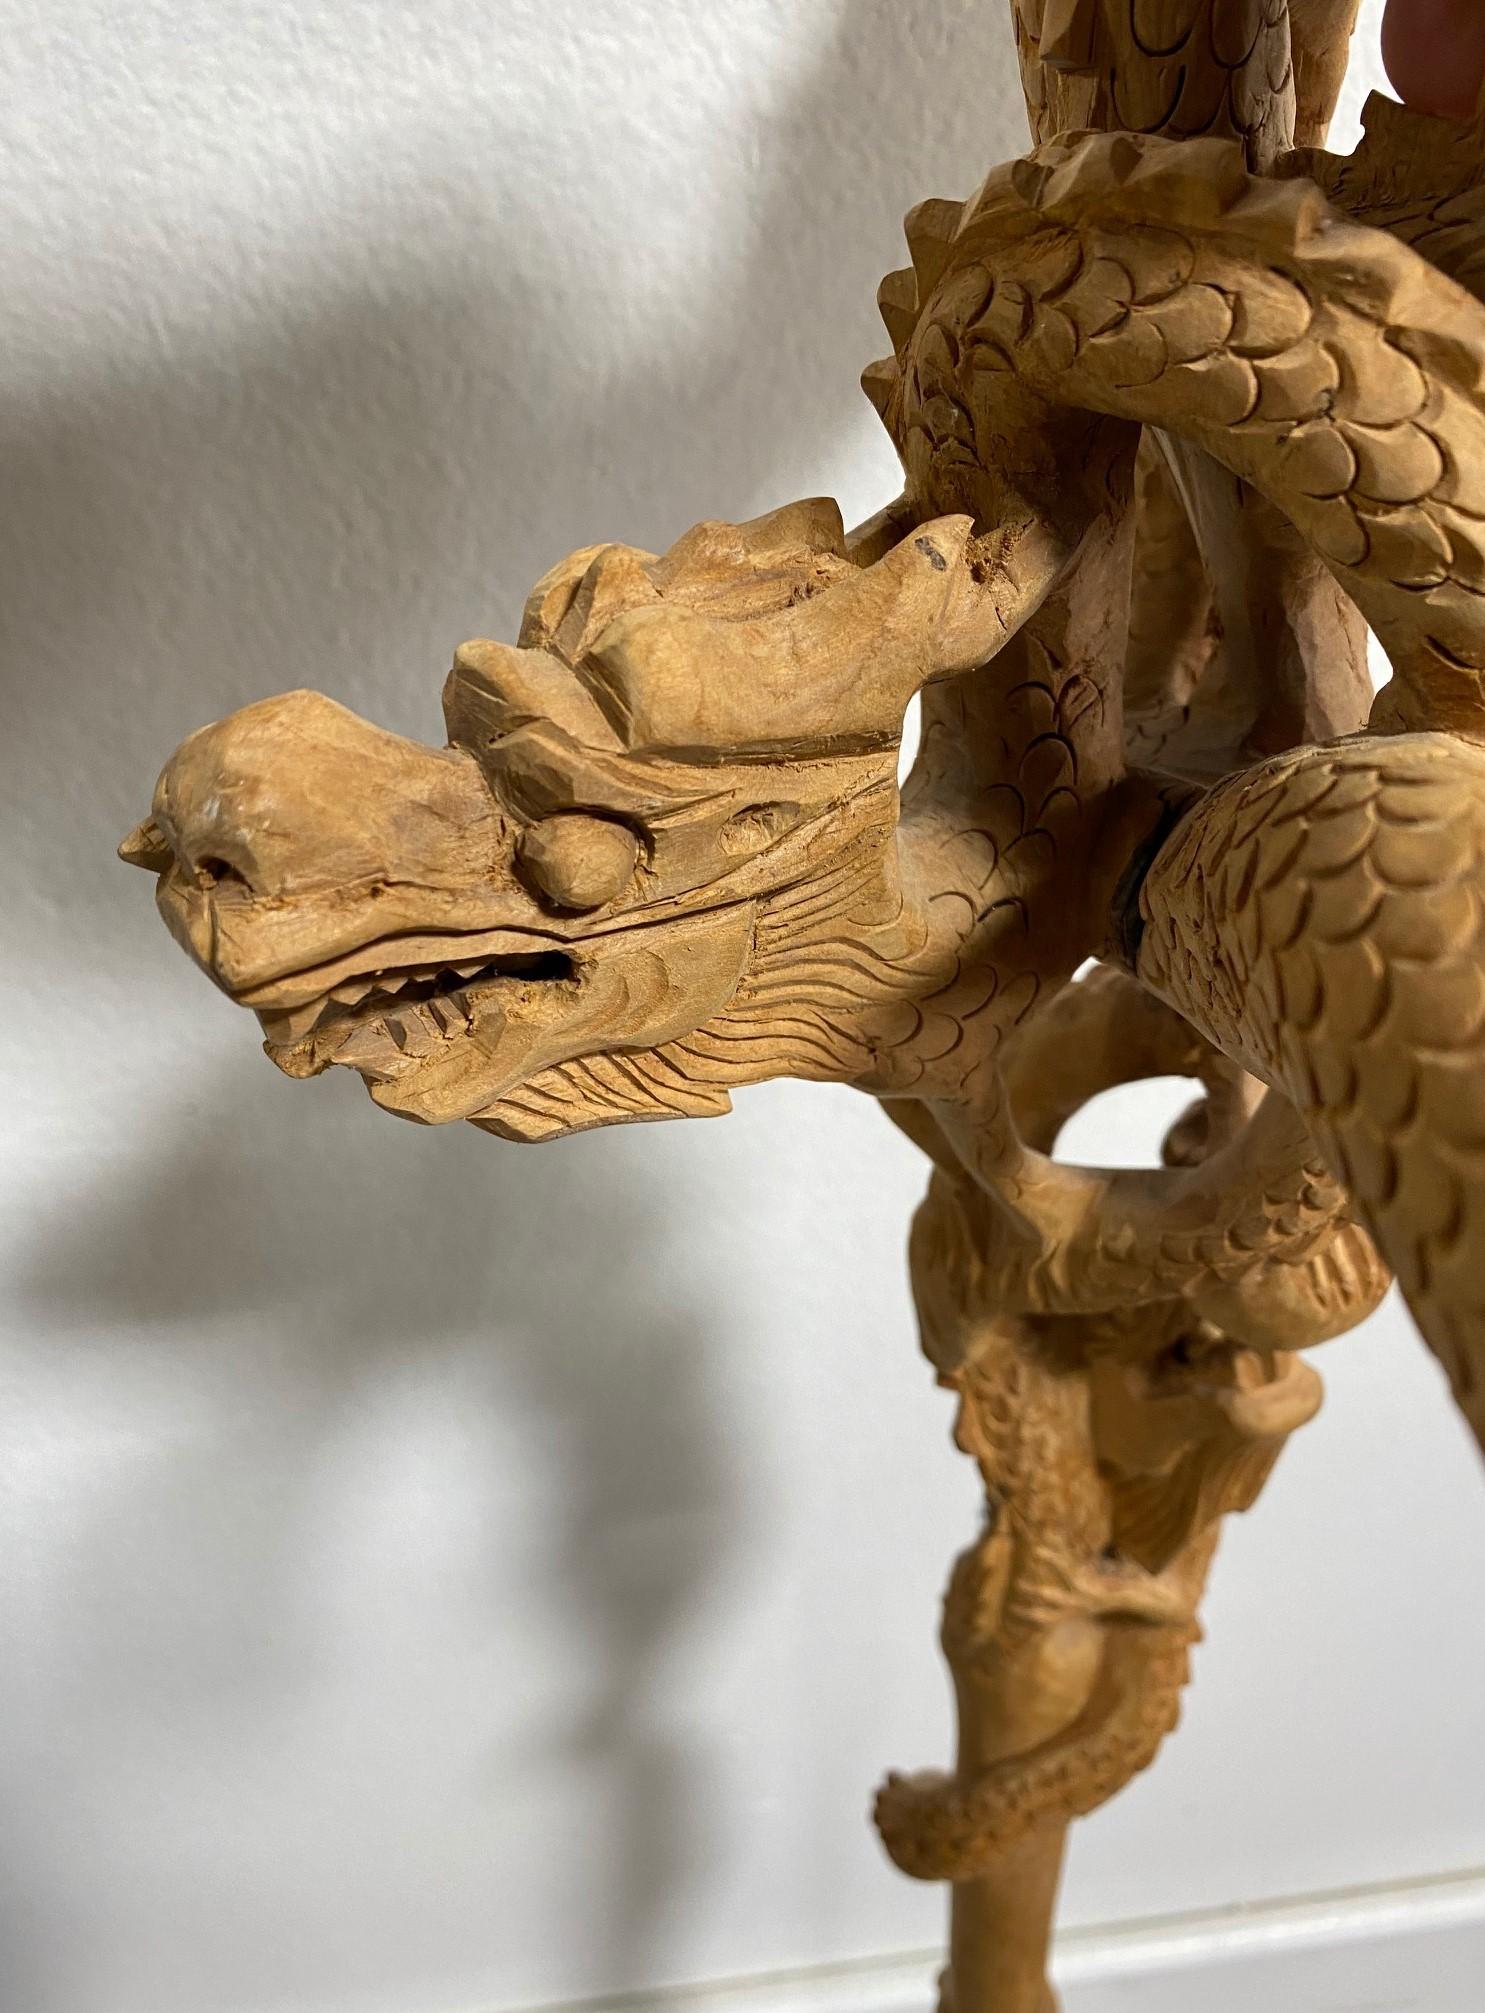 Hand Carved Wood Multi Dragon Head Asian Chinese Walking Cane Stick In Good Condition For Sale In Studio City, CA